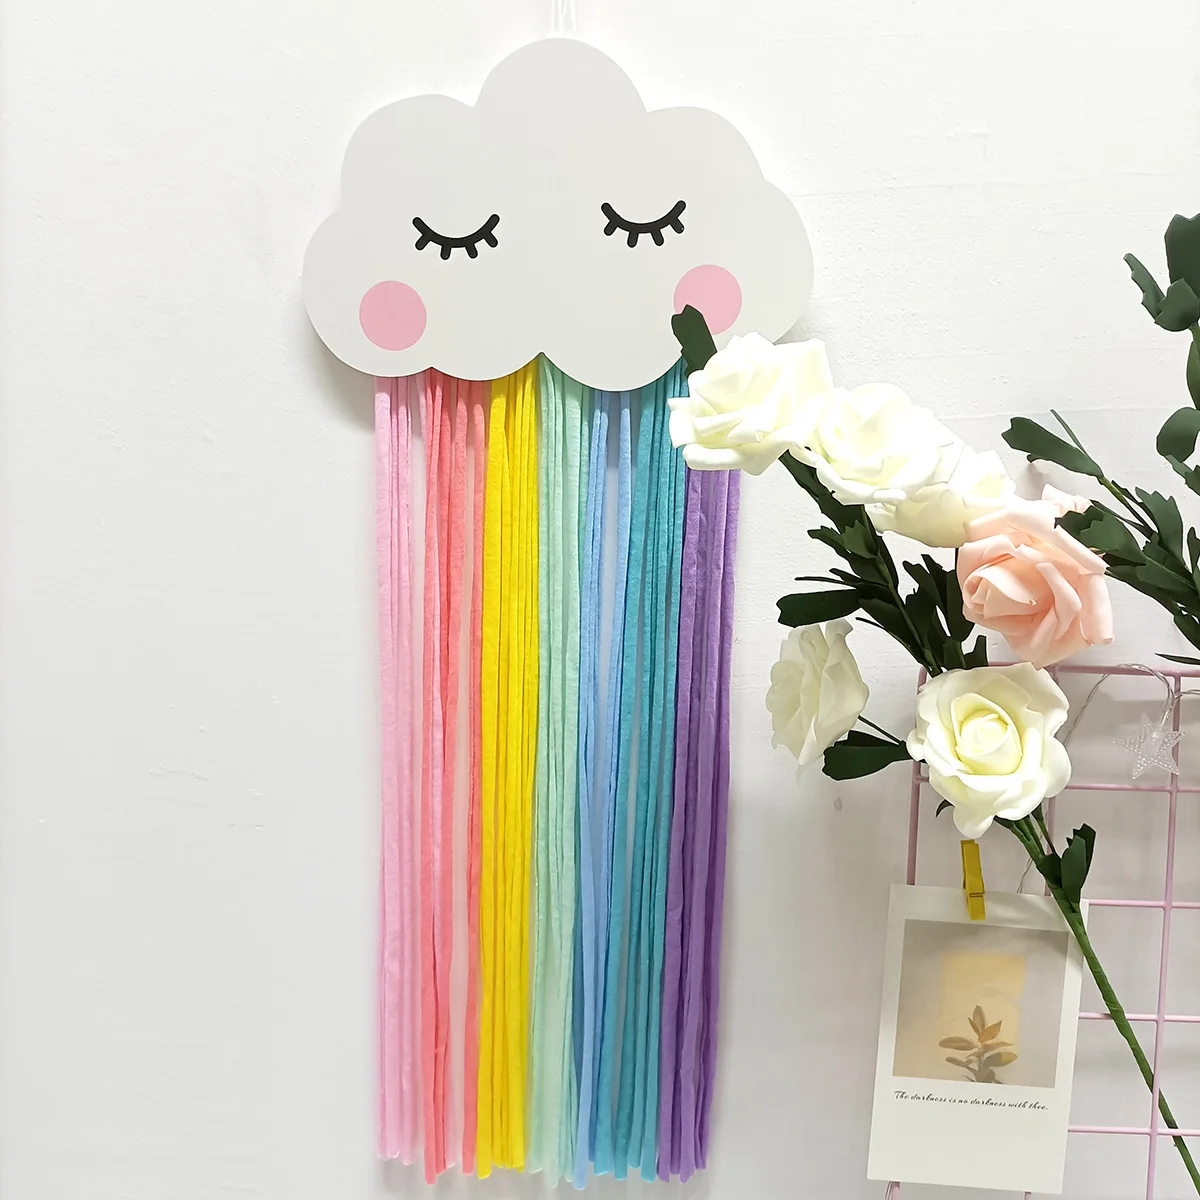 INS Nordic Wooden Hollow Rainbow Clouds Wall Hanging Ornament Tassel Pendant For Girl Kids Room Decorations Nursery Wall Decor